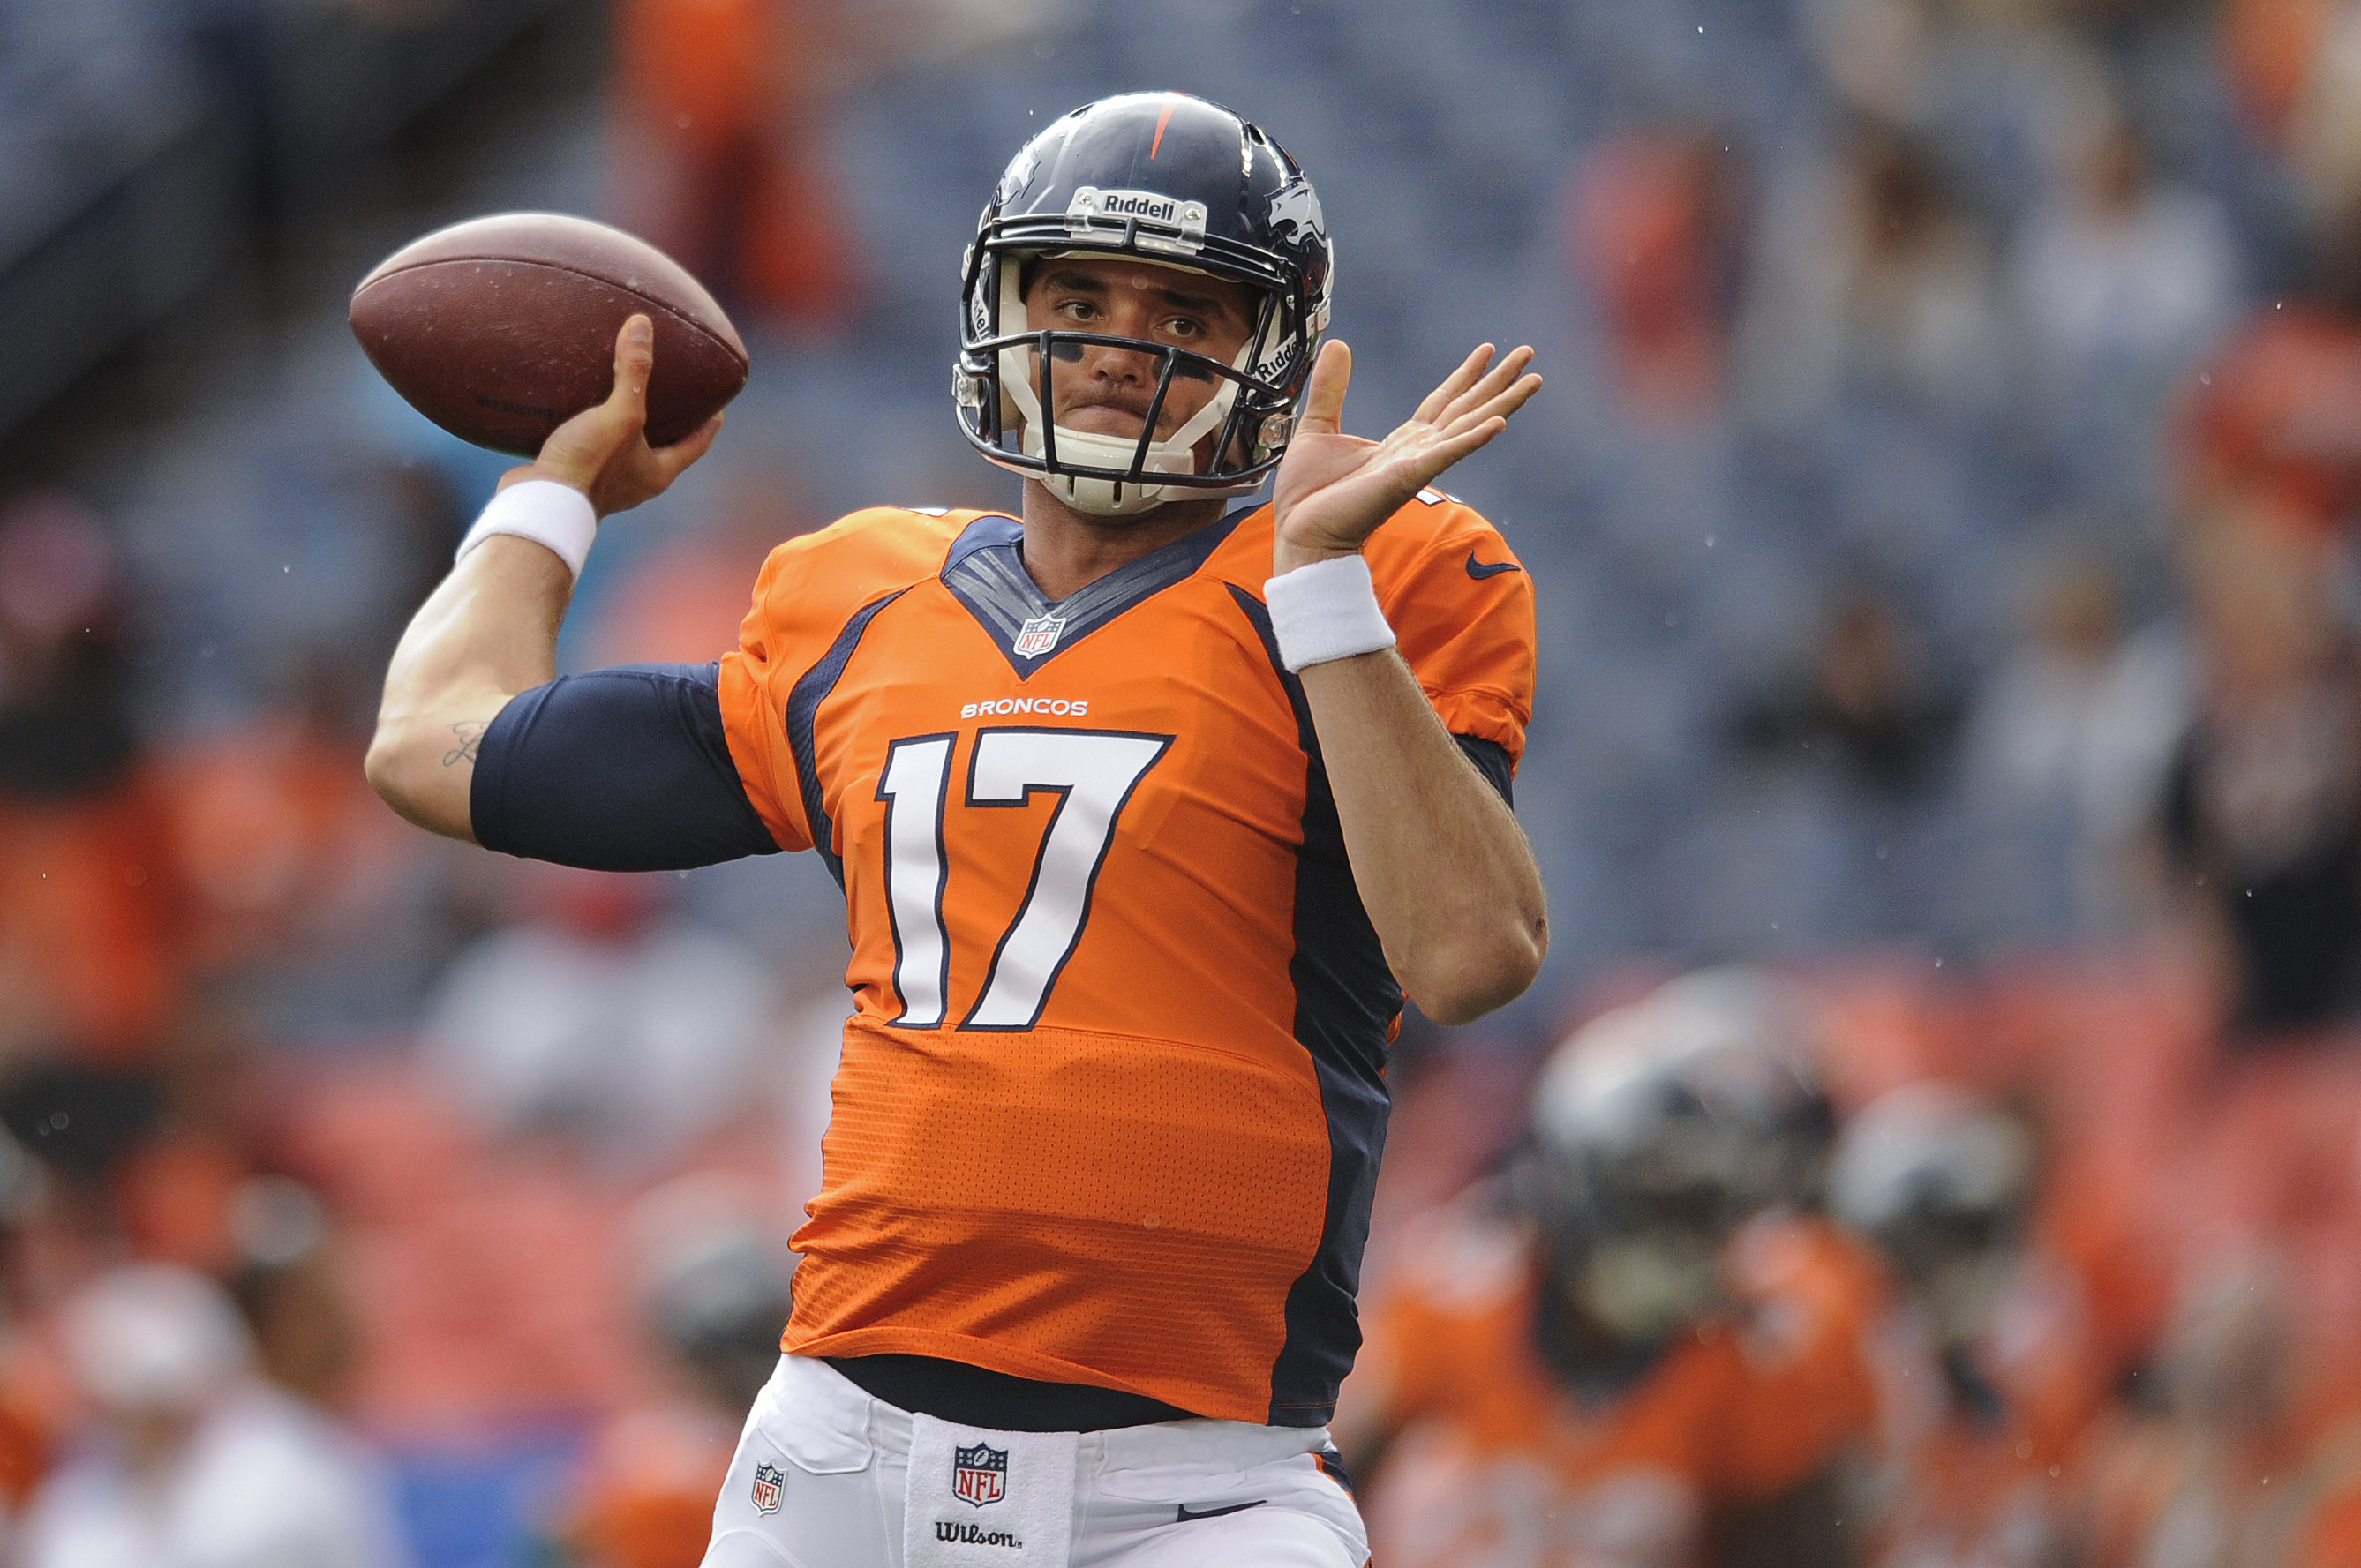 Denver Broncos quarterback Brock Osweiler (17) warms up before playing the St. Louis Rams in a preseason NFL football game, Saturday, Aug. 24, 2013, in Denver. (AP Photo/Jack Dempsey)